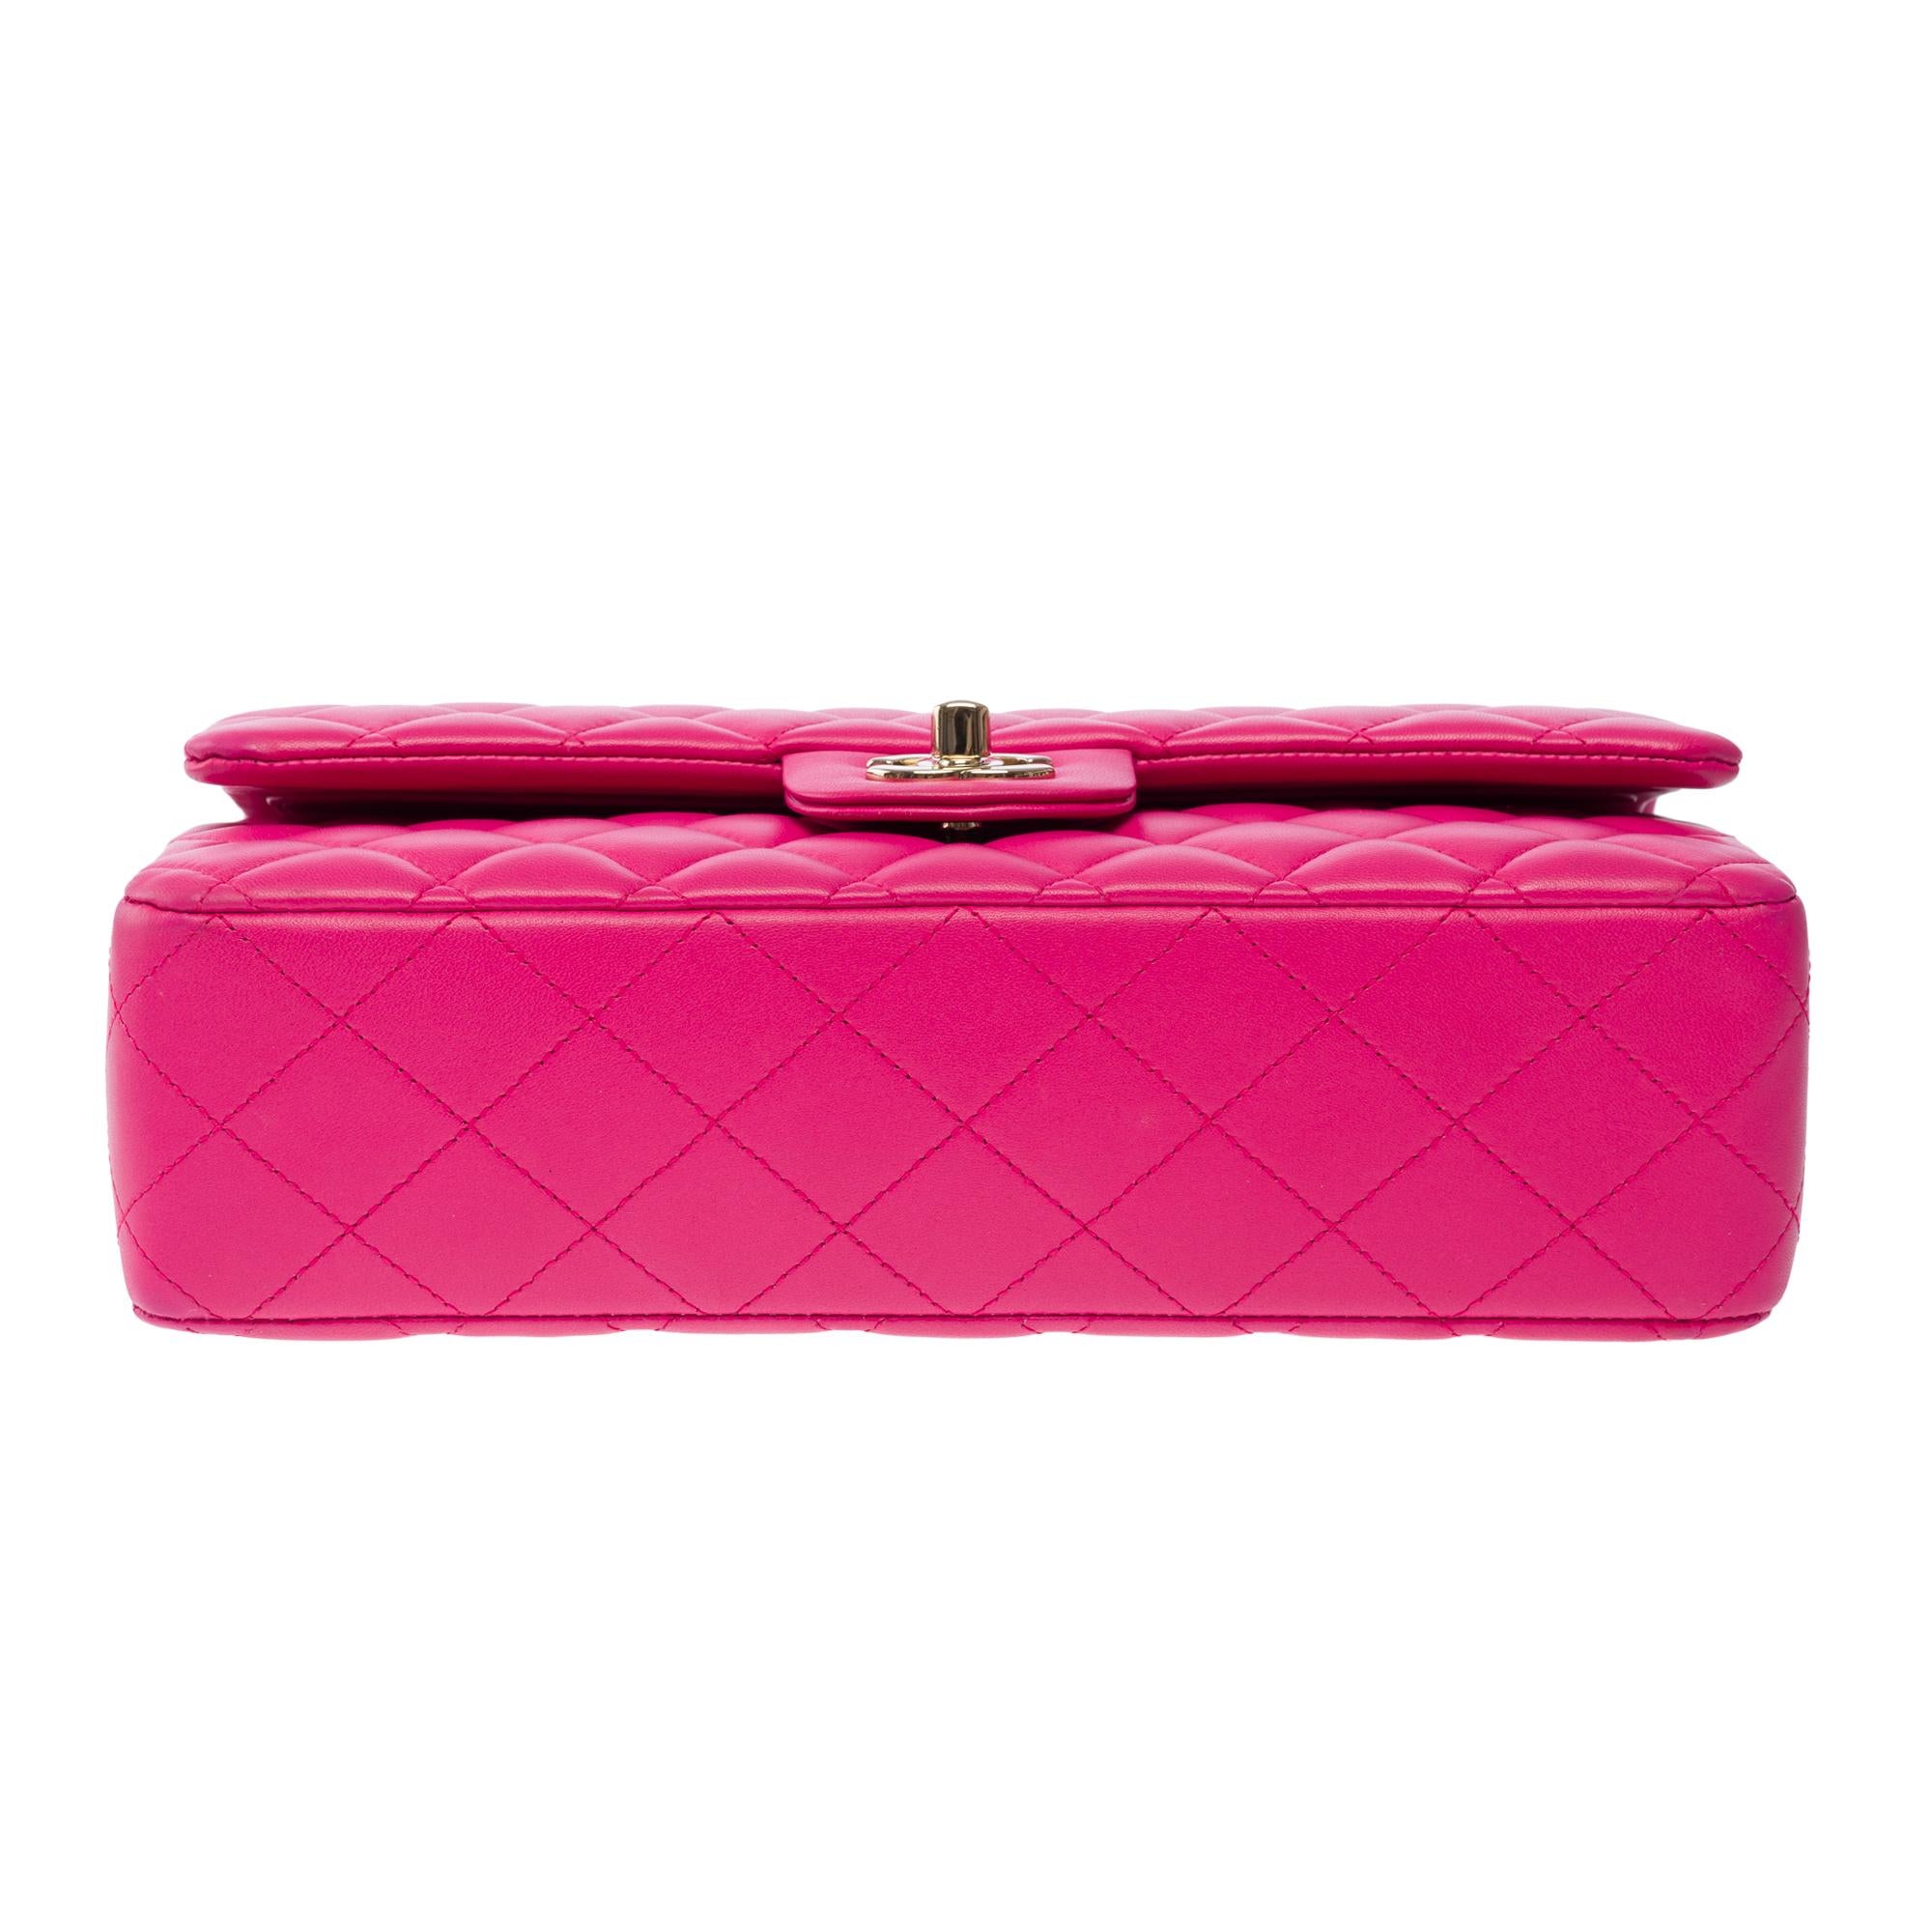 Chanel Timeless double flap shoulder bag in Pink quilted lambskin leather, CHW 7